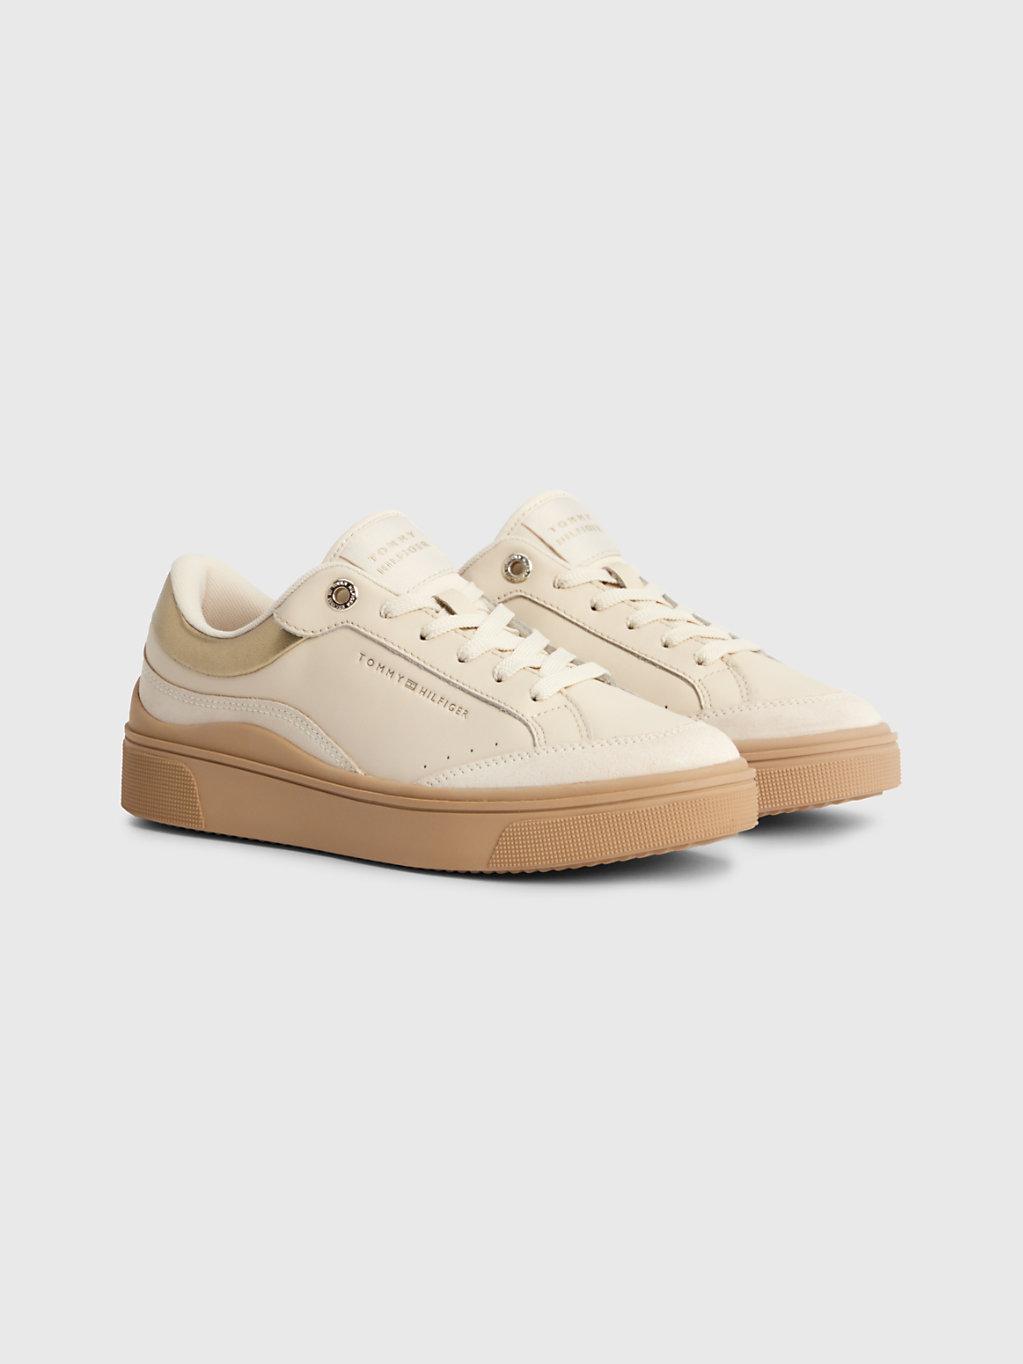 Tommy Hilfiger Metallic Detail Leather Trainers in Natural | Lyst UK